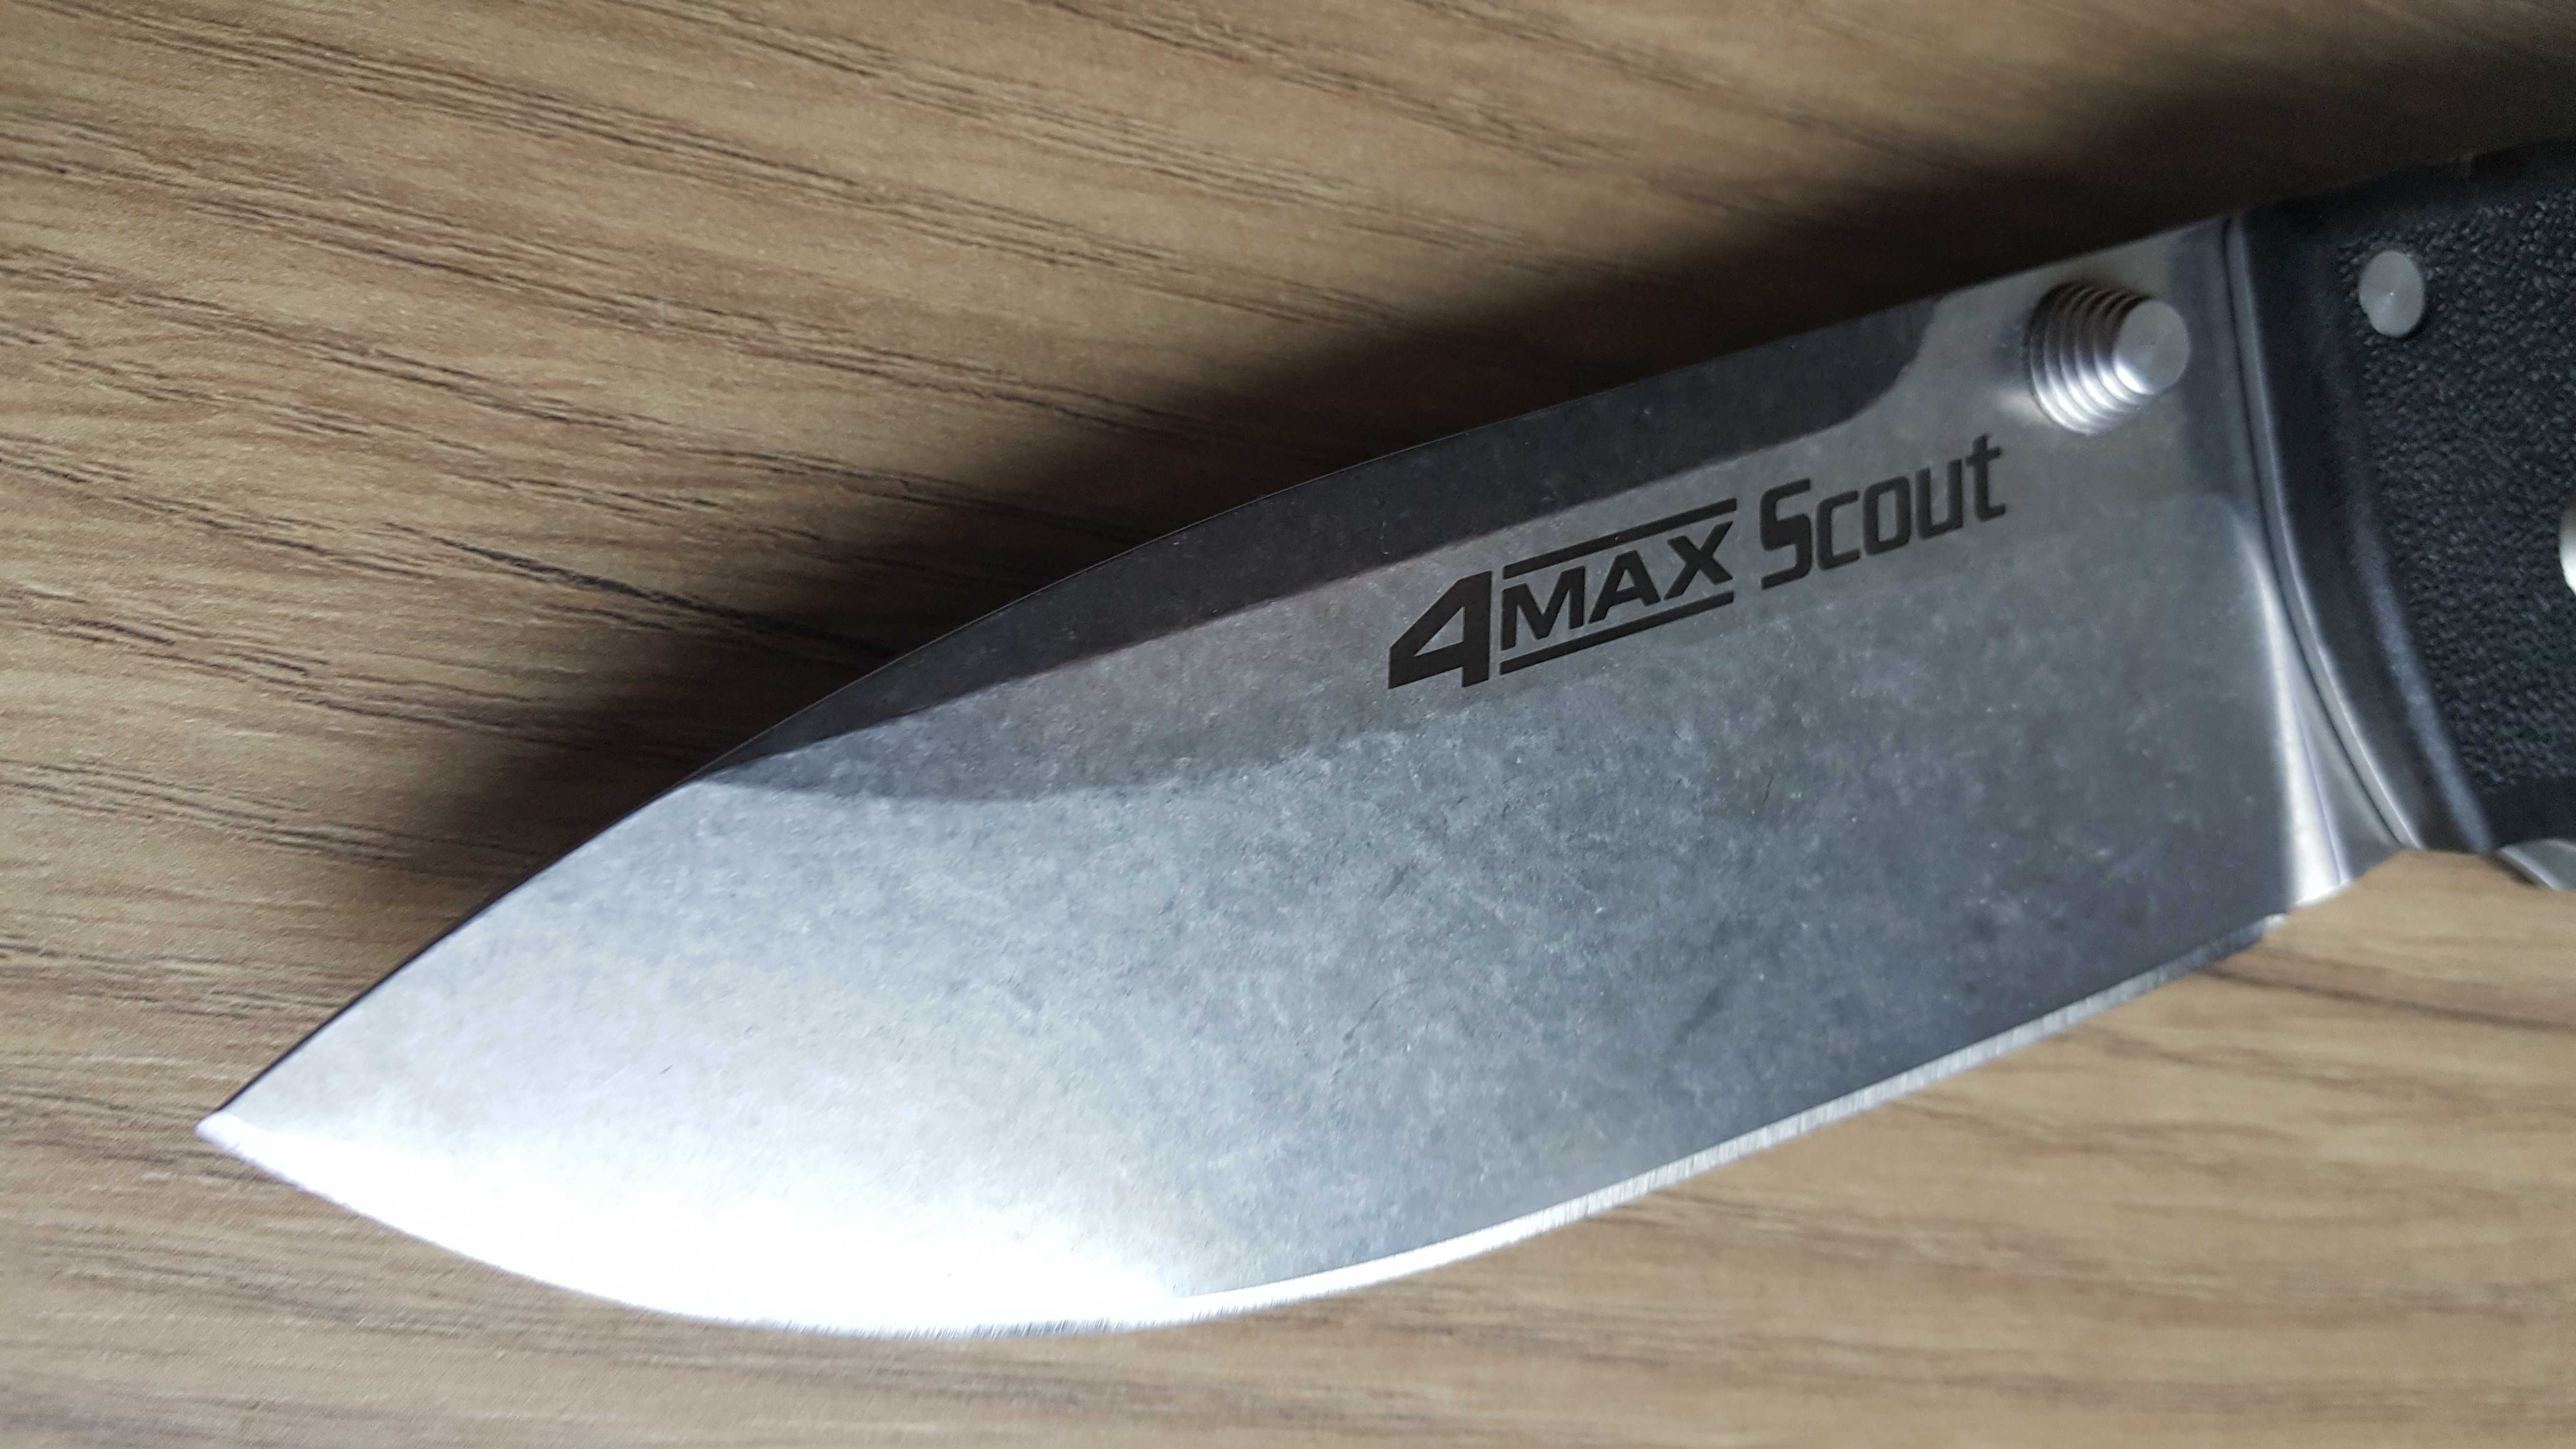 Cold Steel 4 Max Scout Nowy